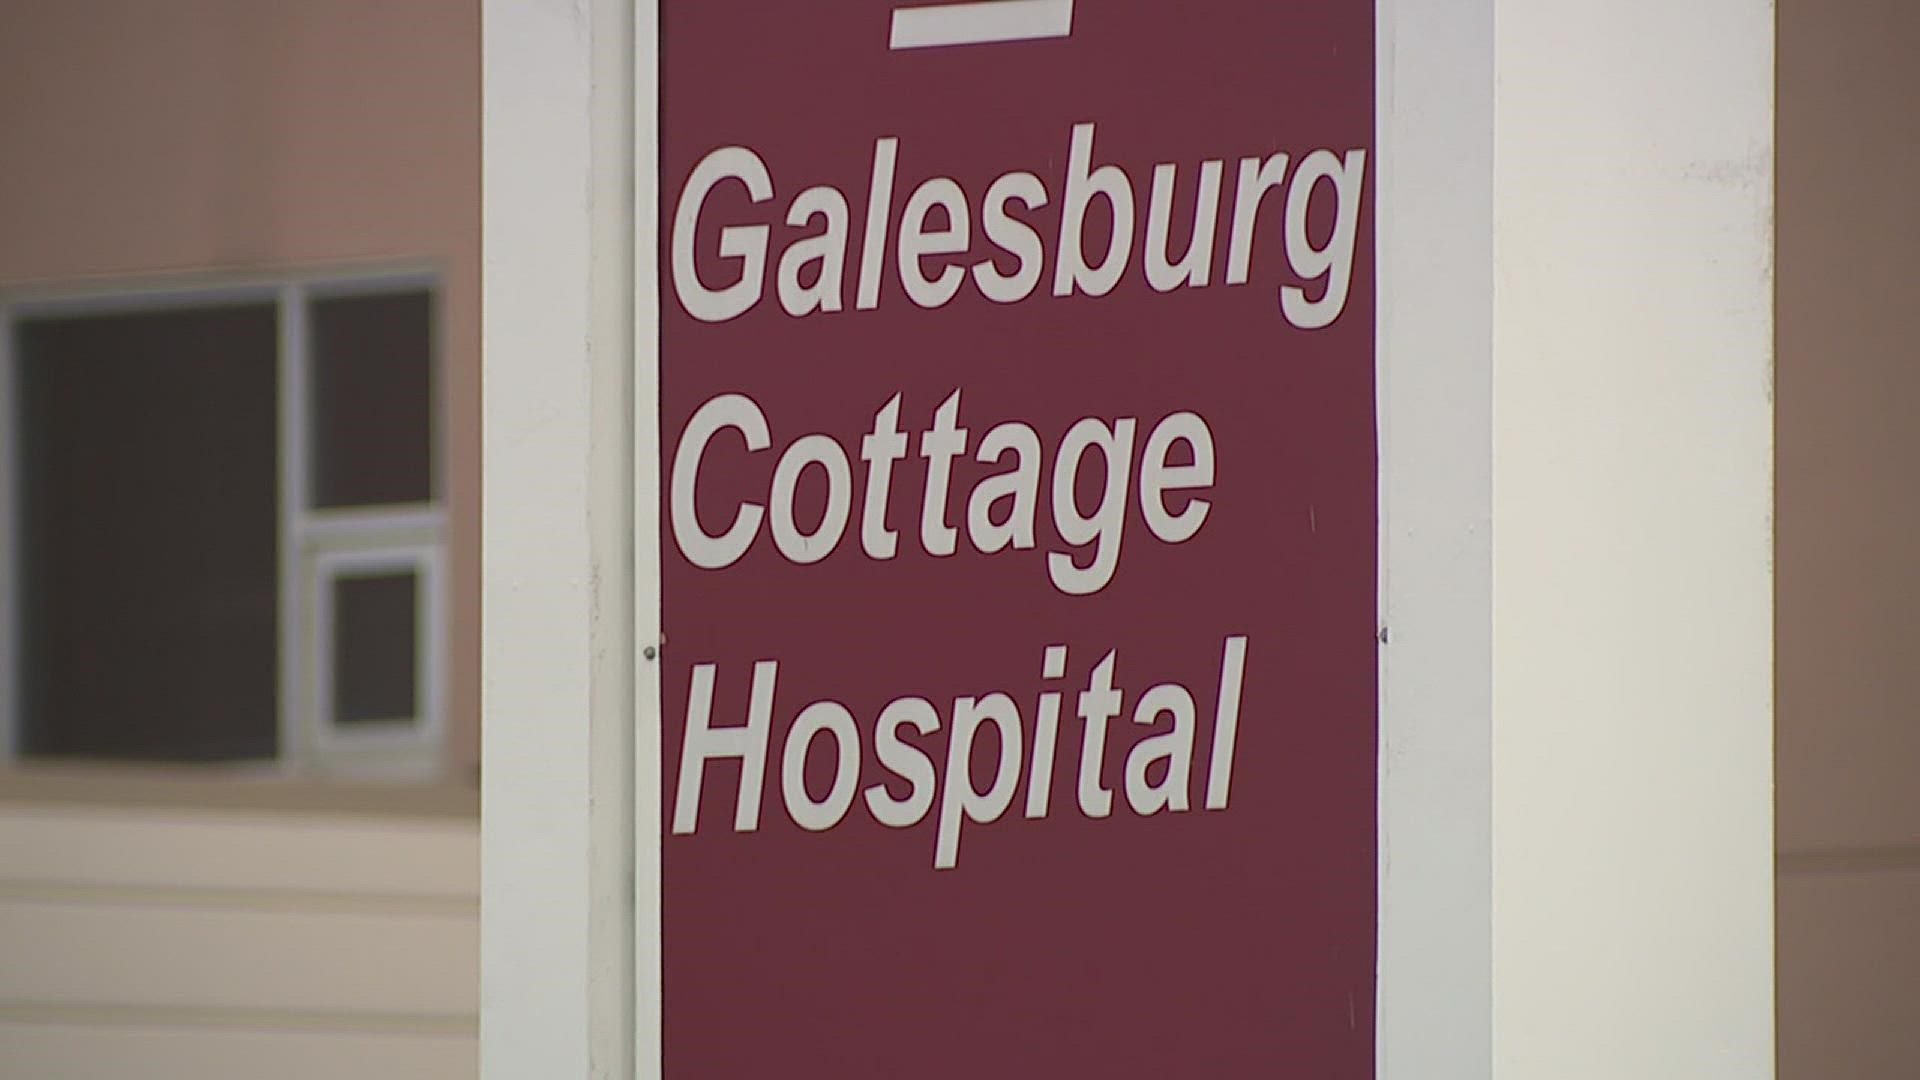 OSF HealthCare announced it intends to purchase real estate, medical equipment and other assets from Galesburg Cottage Hospital.